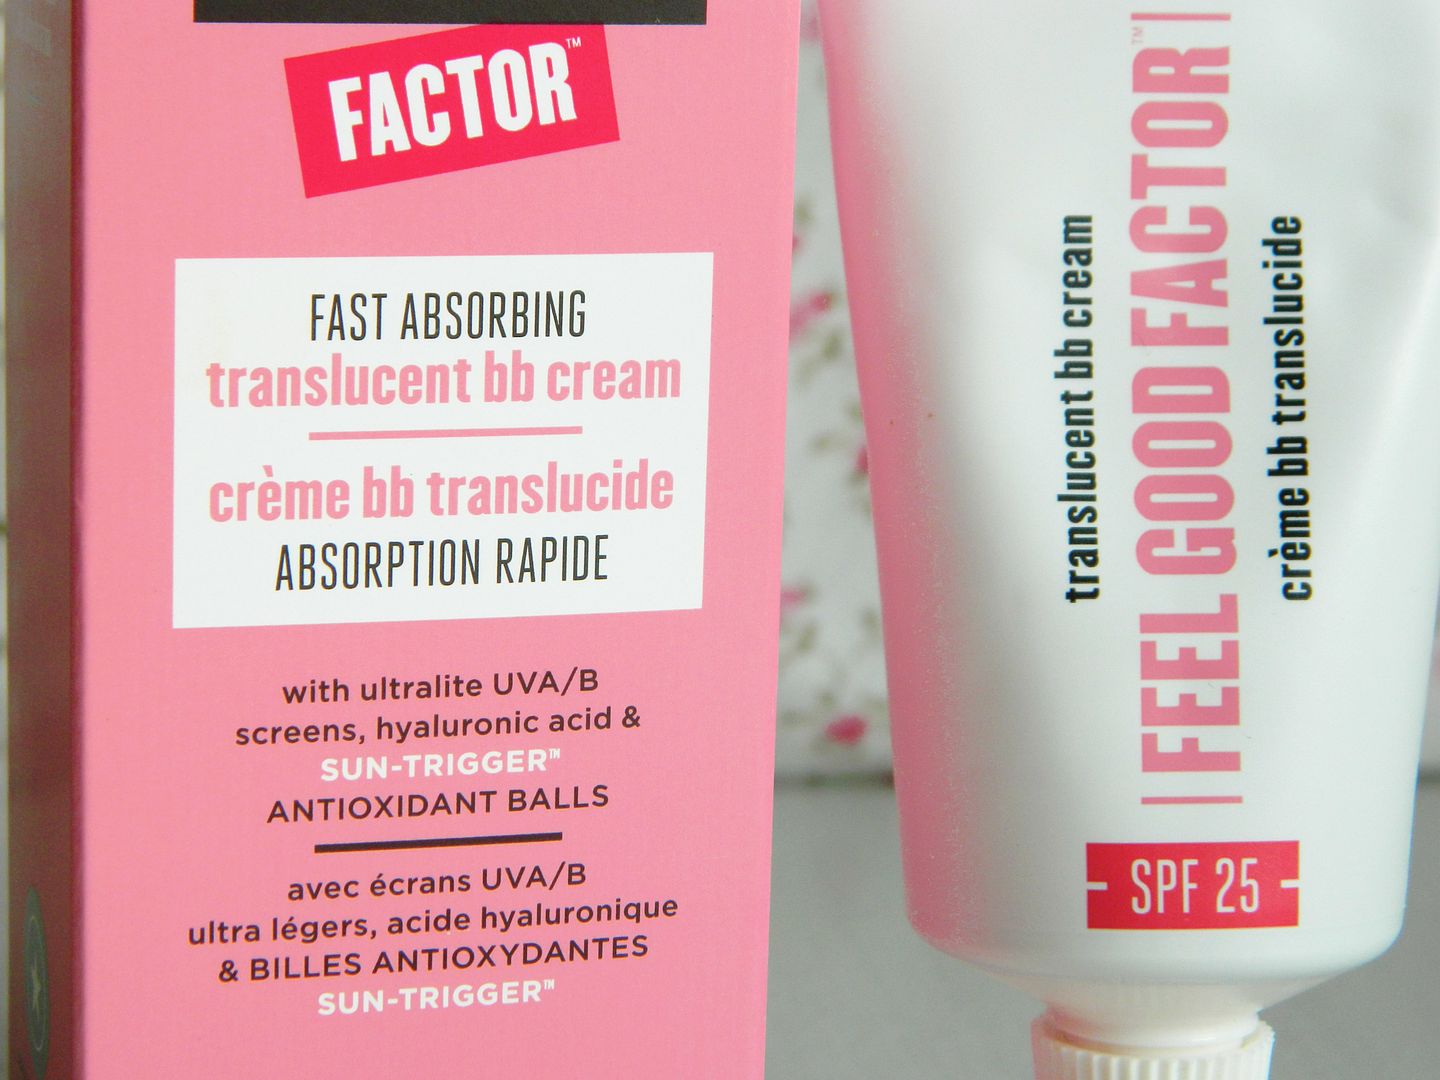 Soap And Glory Feel Good Factor Translucent BB Cream Review Packaging Belle-amie UK Beauty Fashion Lifestyle Blog